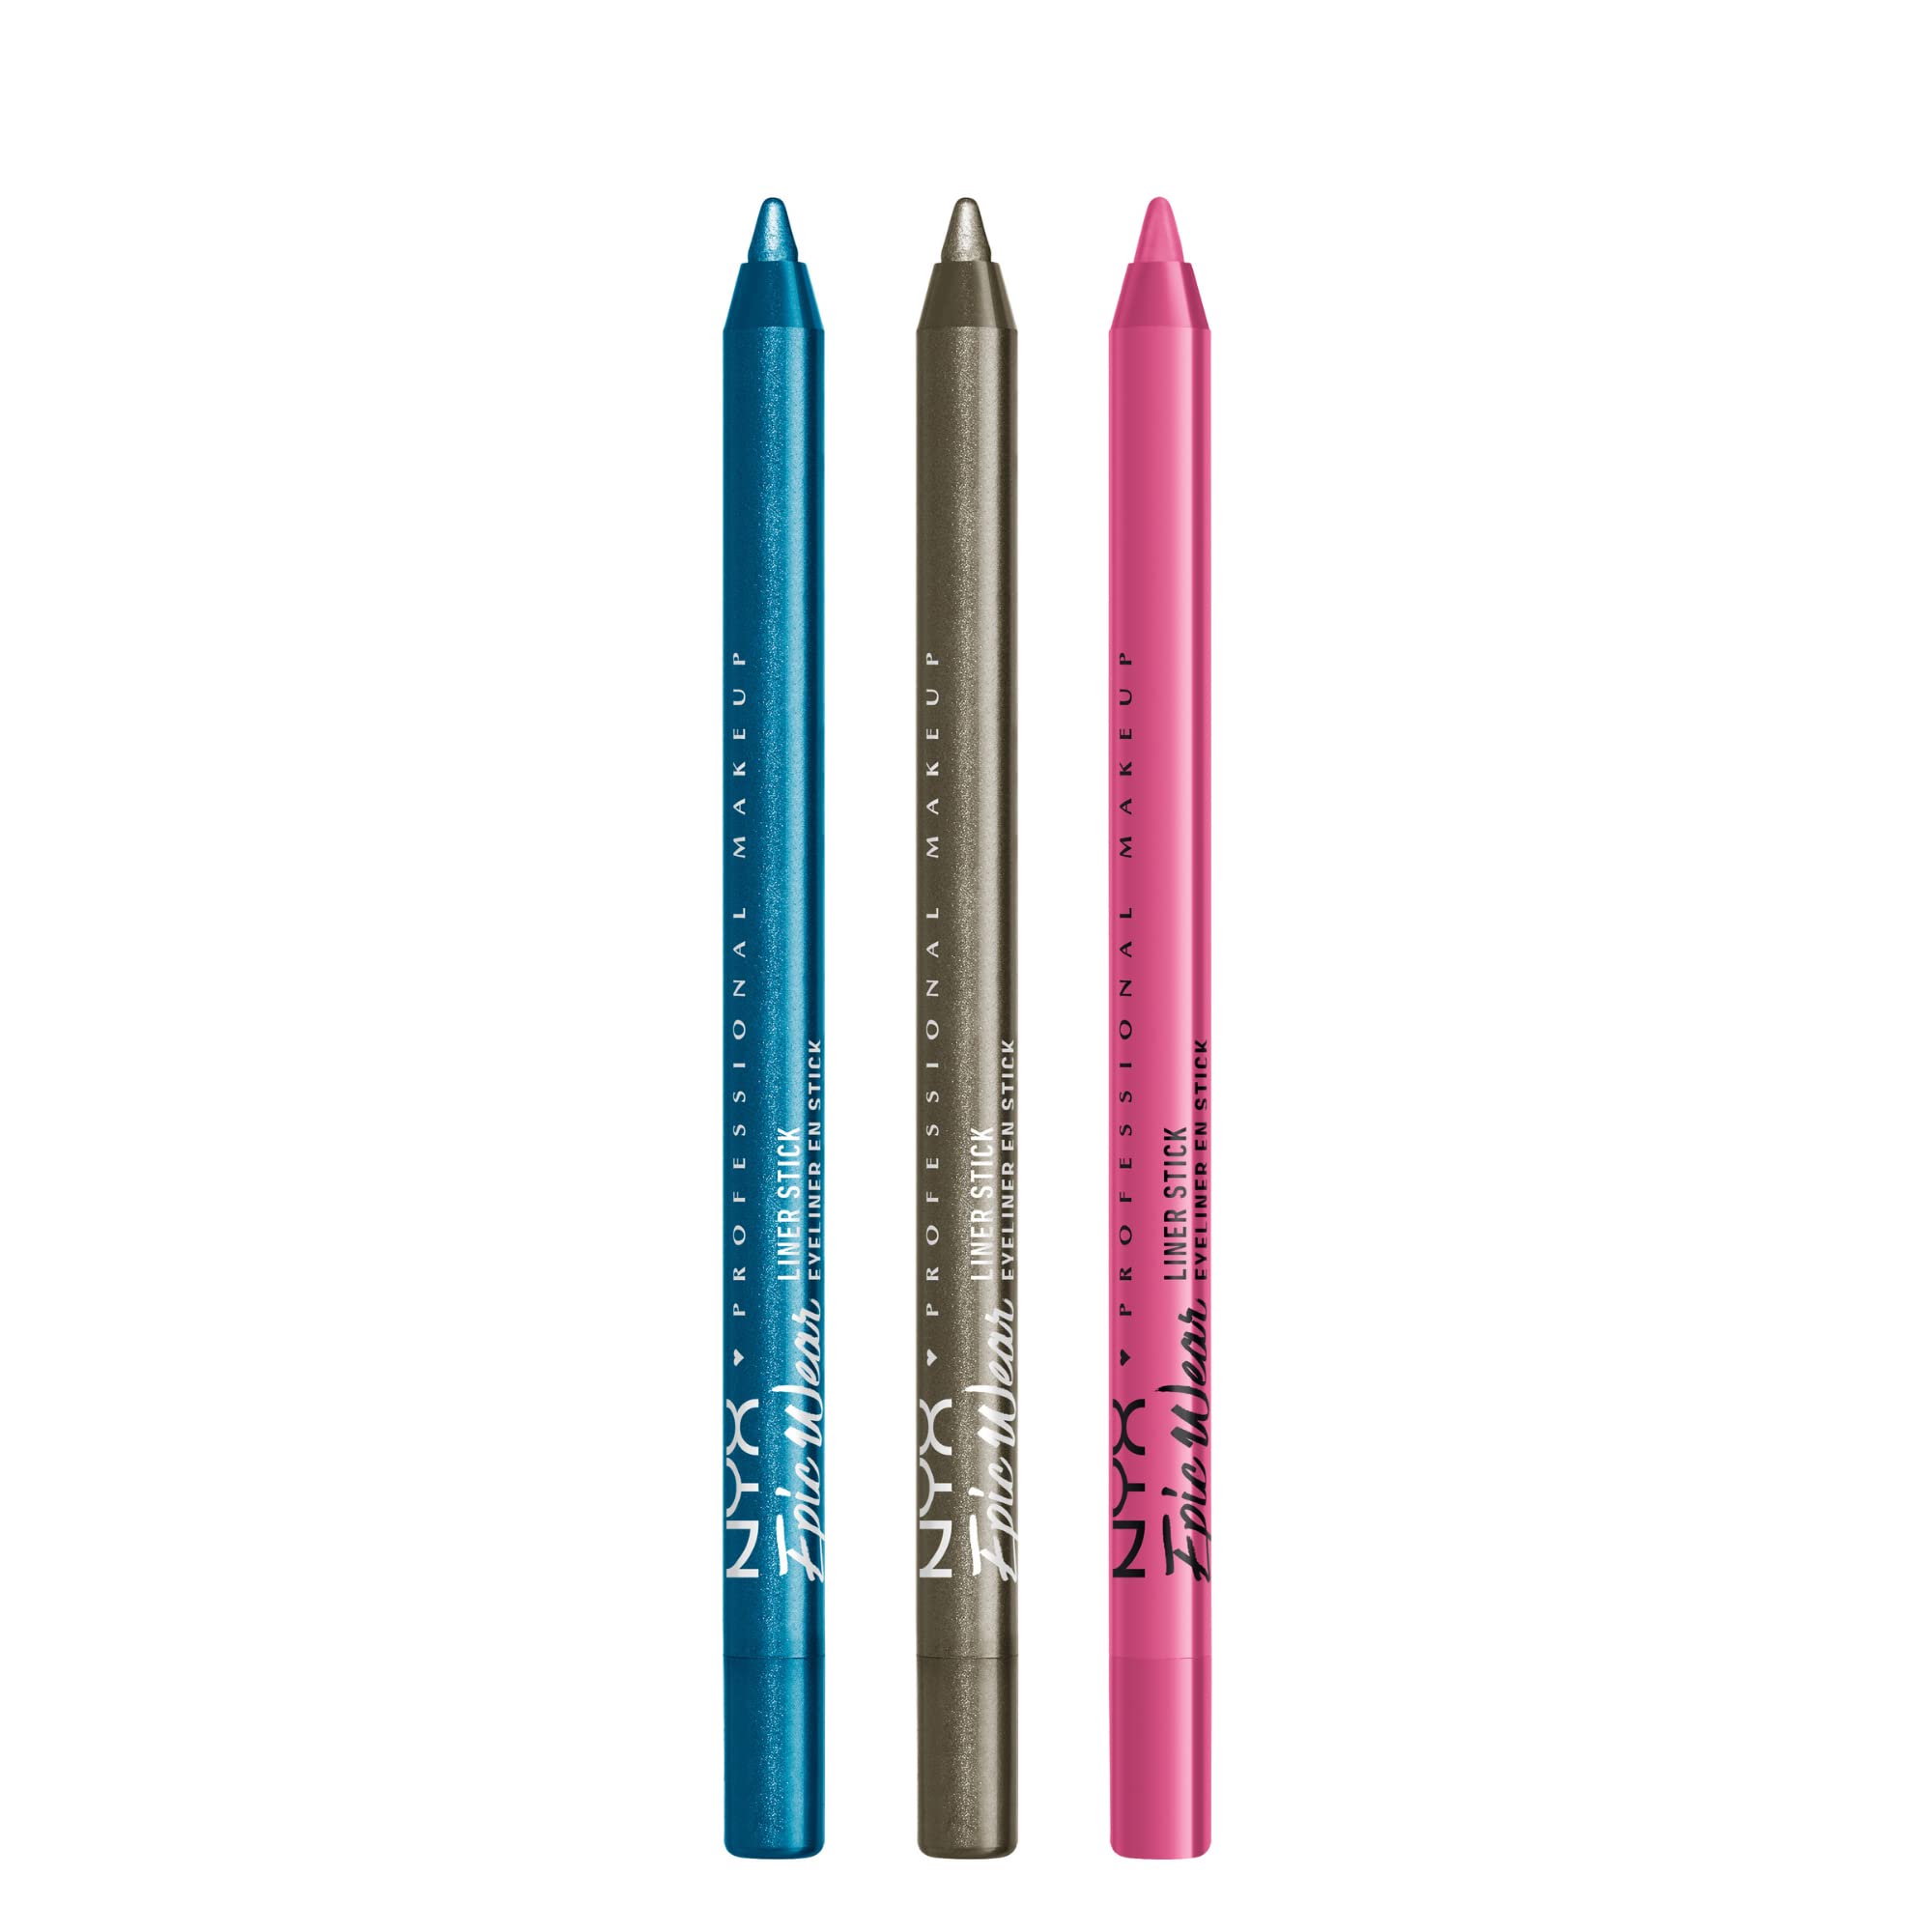 NYX PROFESSIONAL MAKEUP Epic Wear - of 3 Storm Pencil Stick Pack Liner (Turquoise Long-Lasting Eyeliner